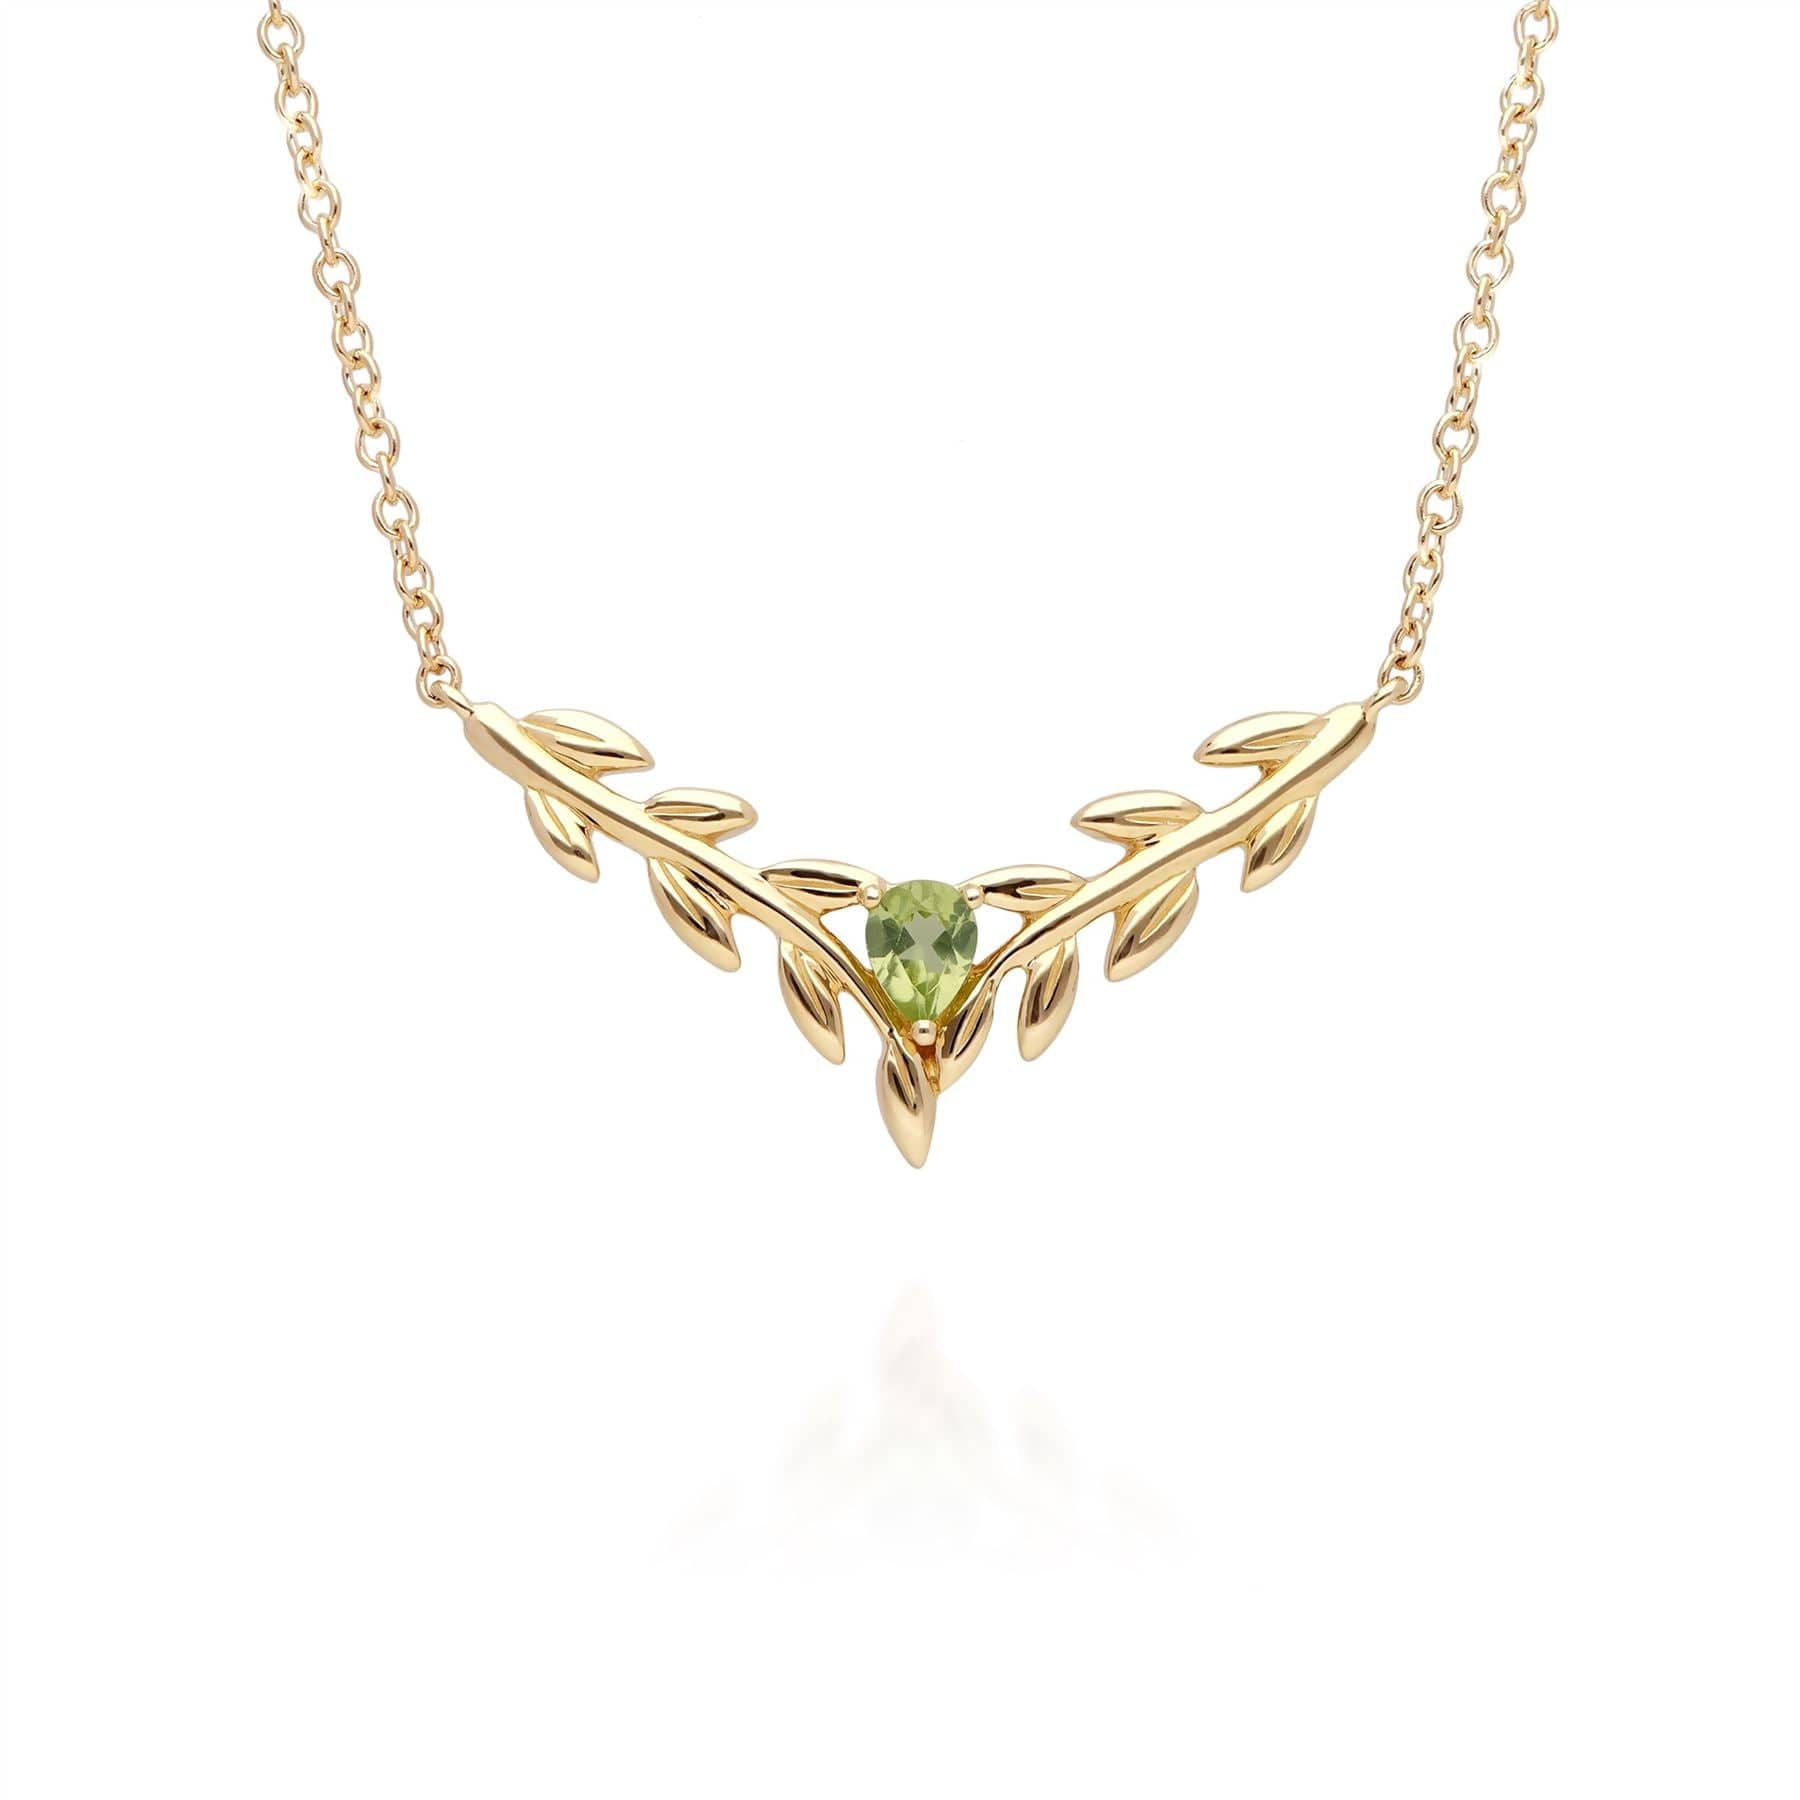 Photos - Pendant / Choker Necklace O Leaf Peridot Necklet in 9ct Yellow Gold